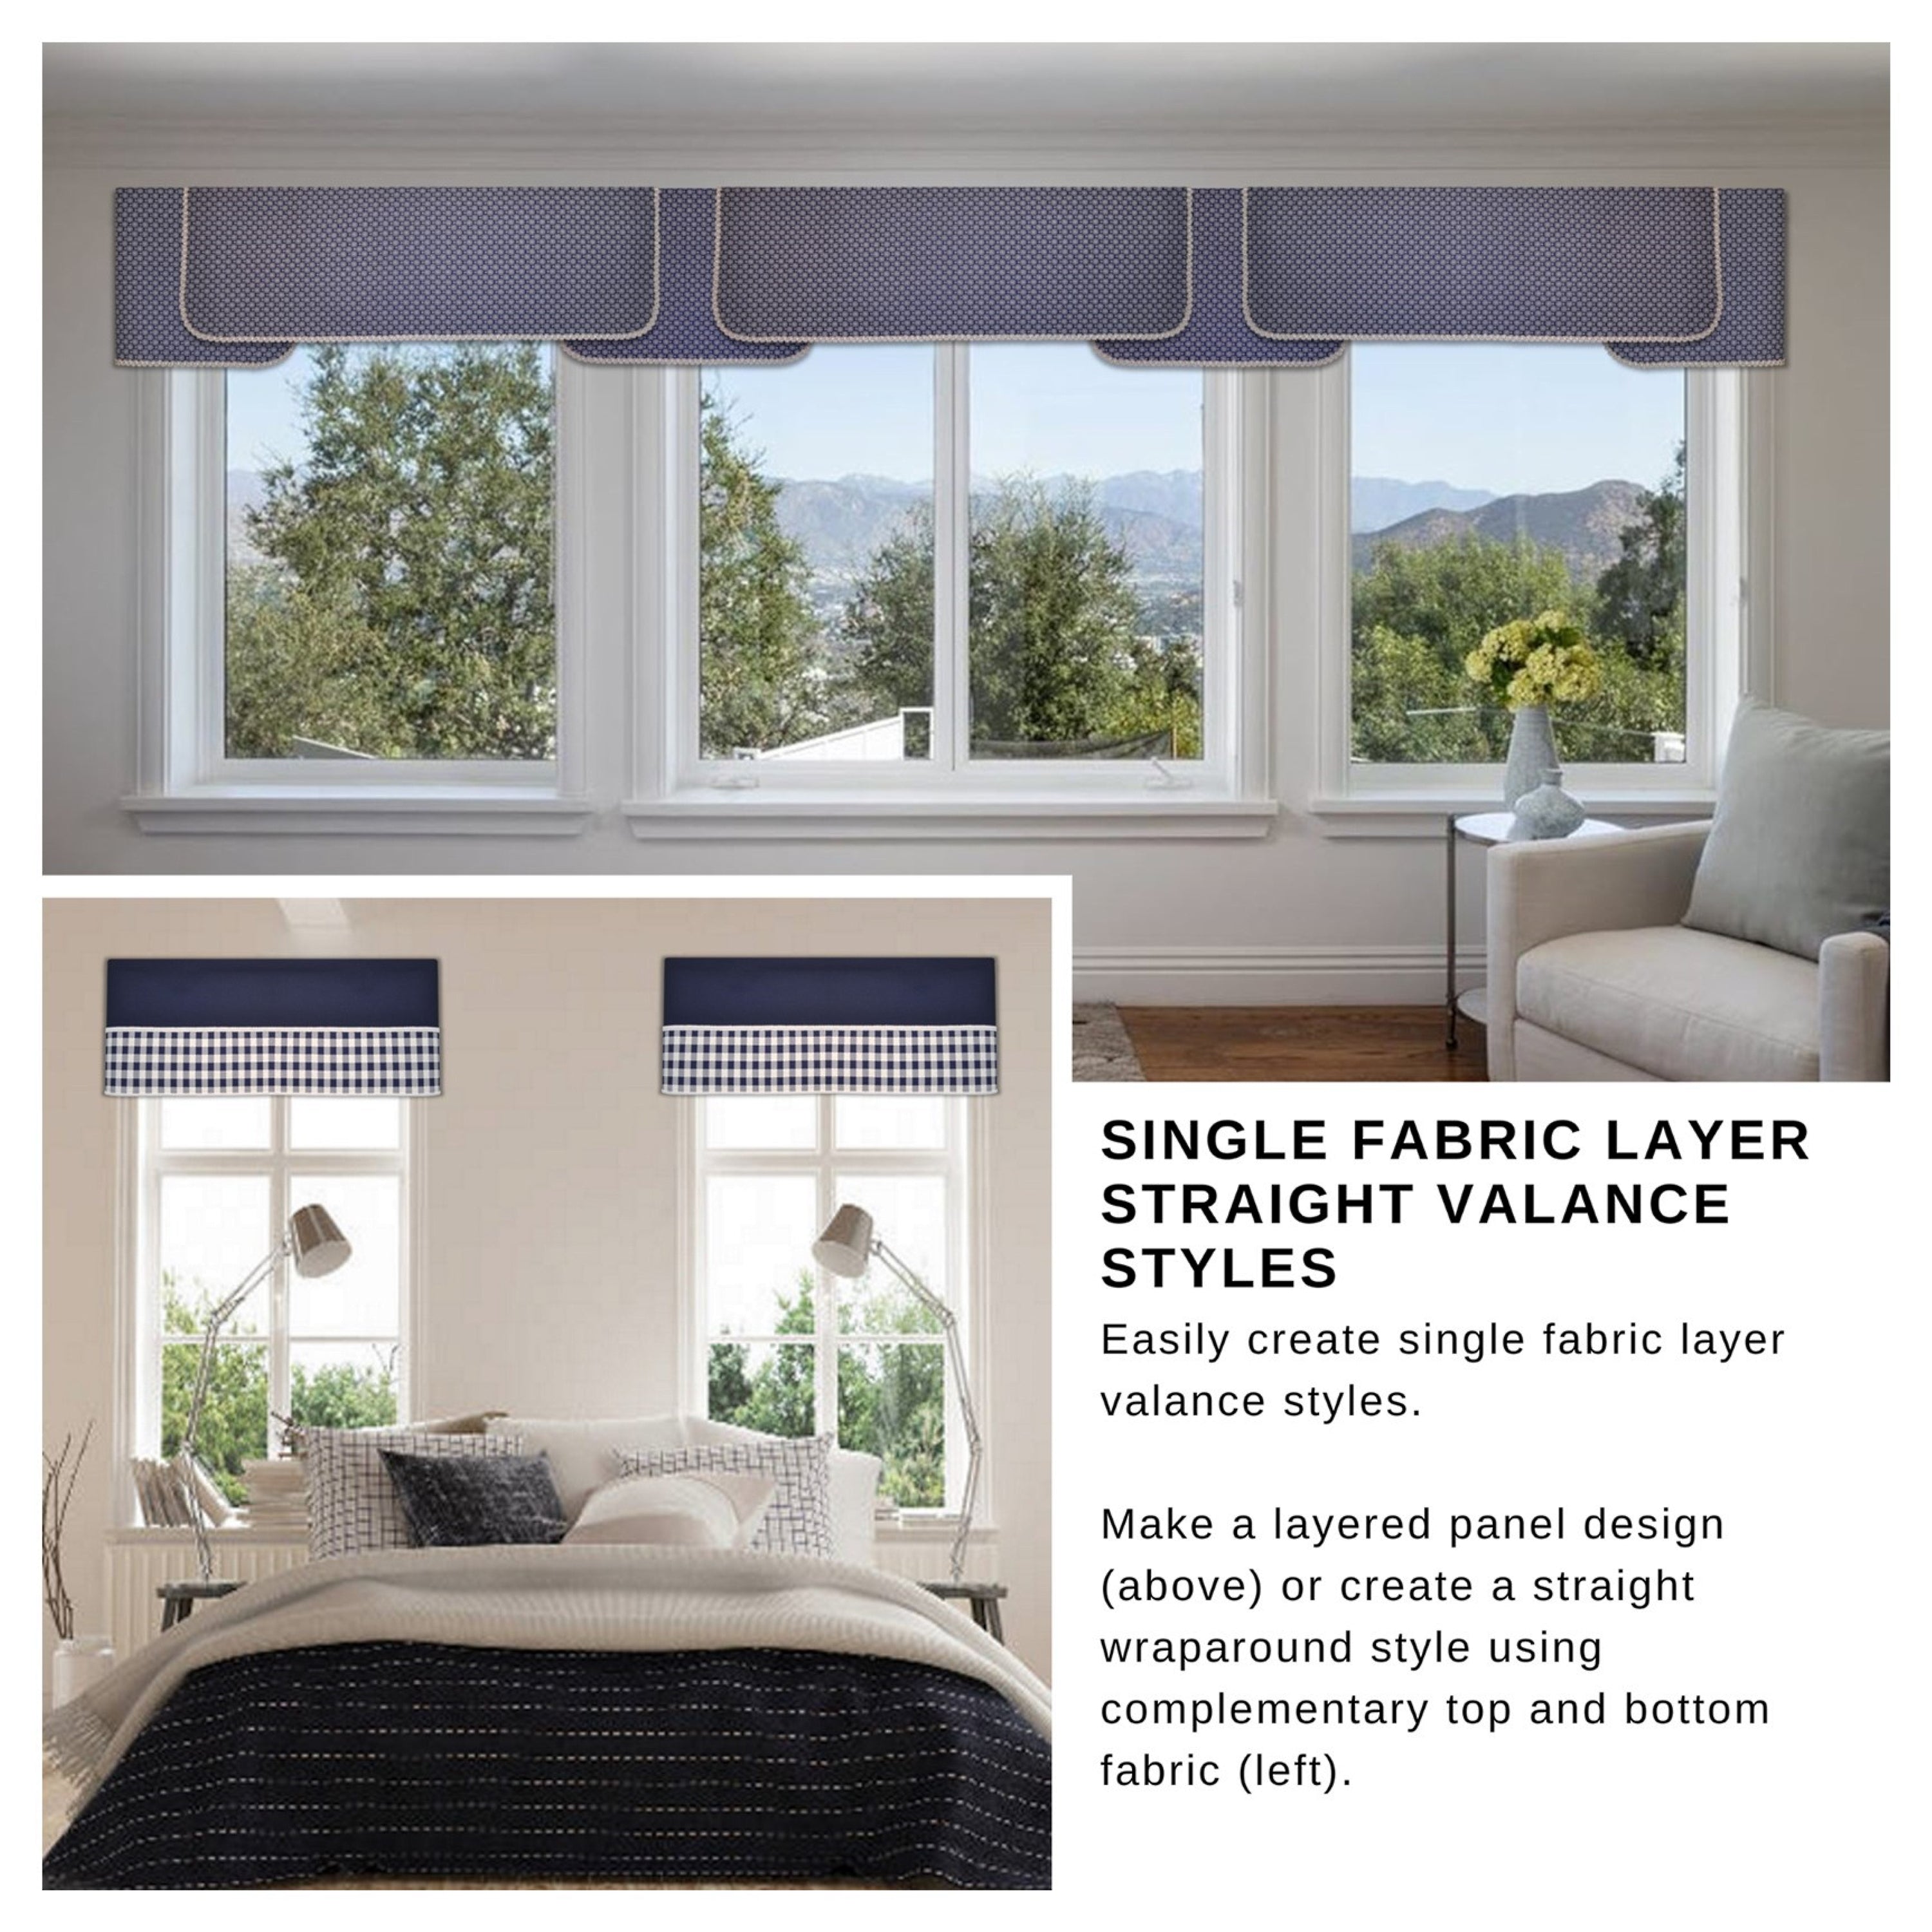 Traceable Designer No-Sew, Straight & Layered Valance Kit for DIY Home Decorating